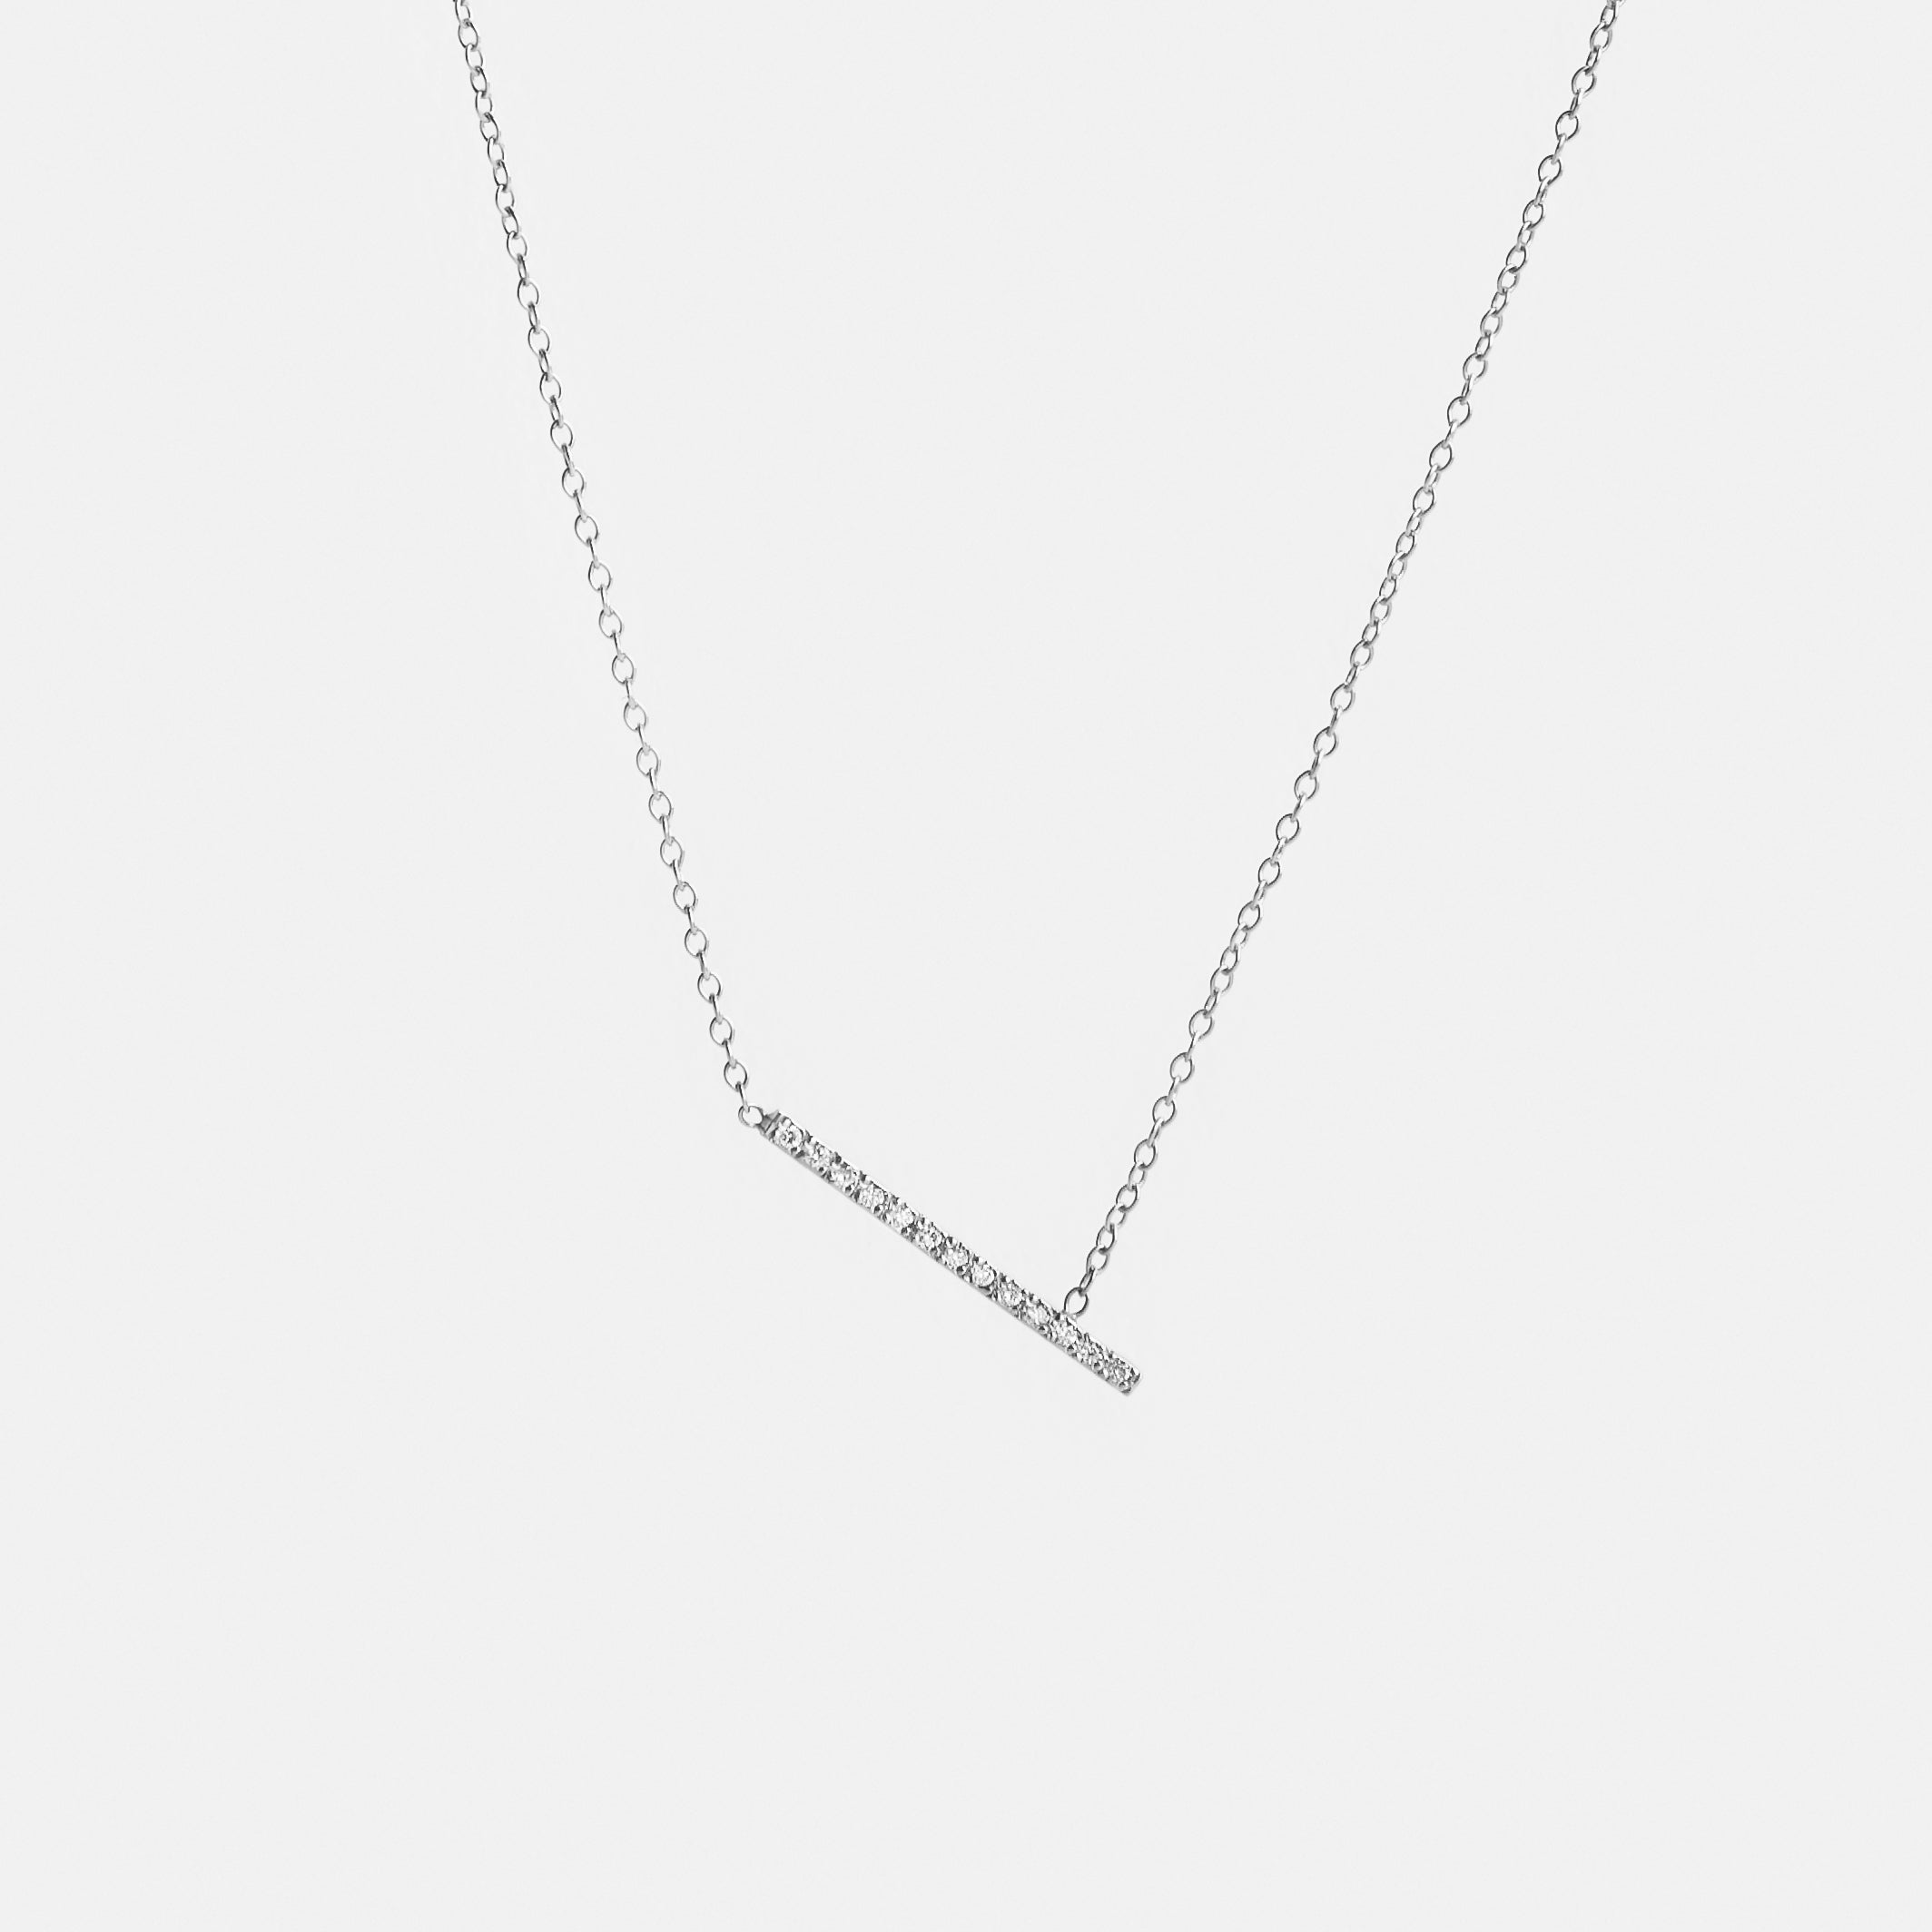 Tira Unconventional Necklace in 14k White Gold set with White Diamonds By SHW Fine Jewelry NYC